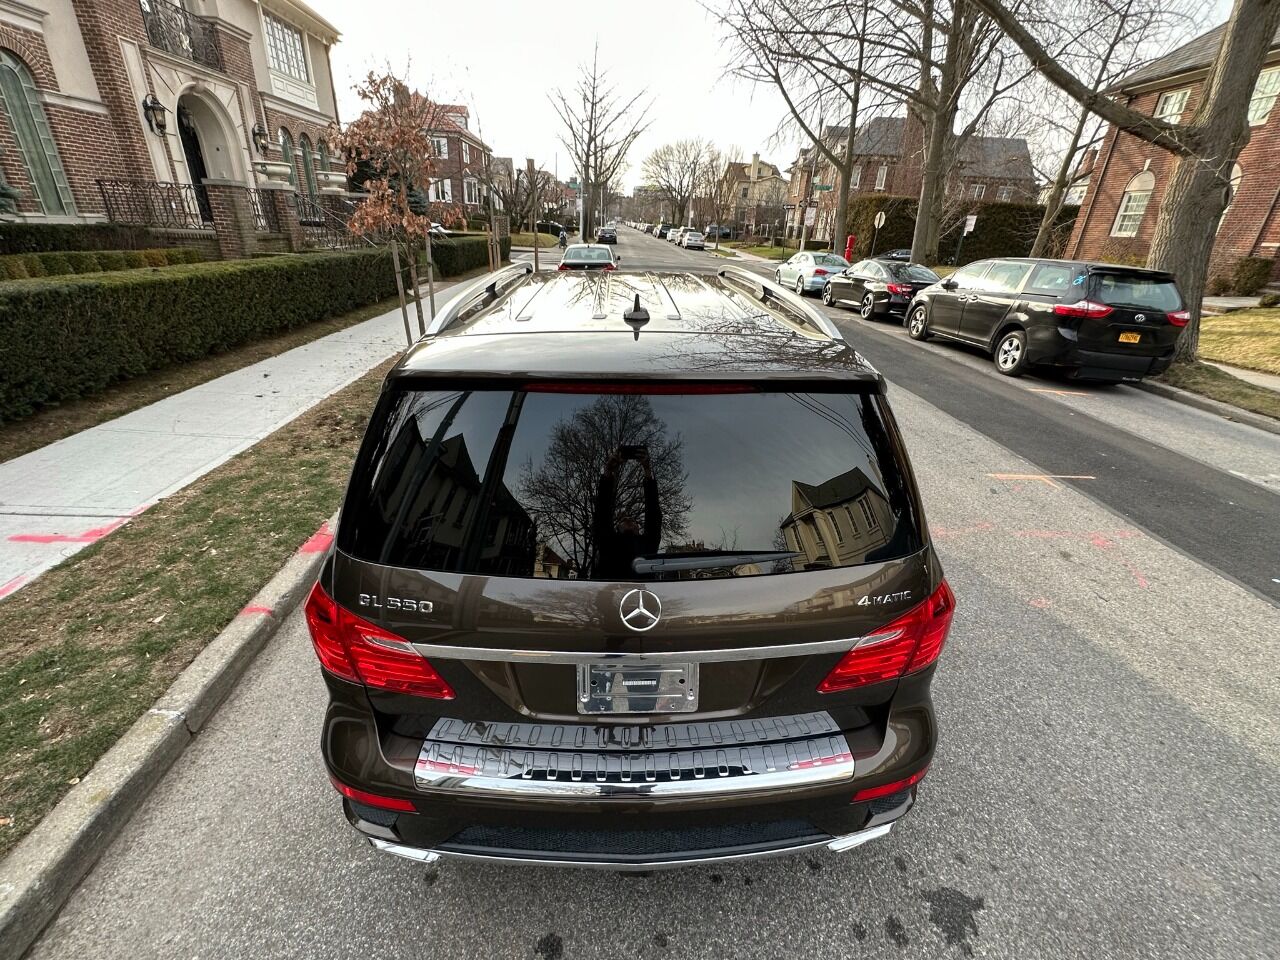 2014 MERCEDES-BENZ GL-Class SUV / Crossover - $22,900